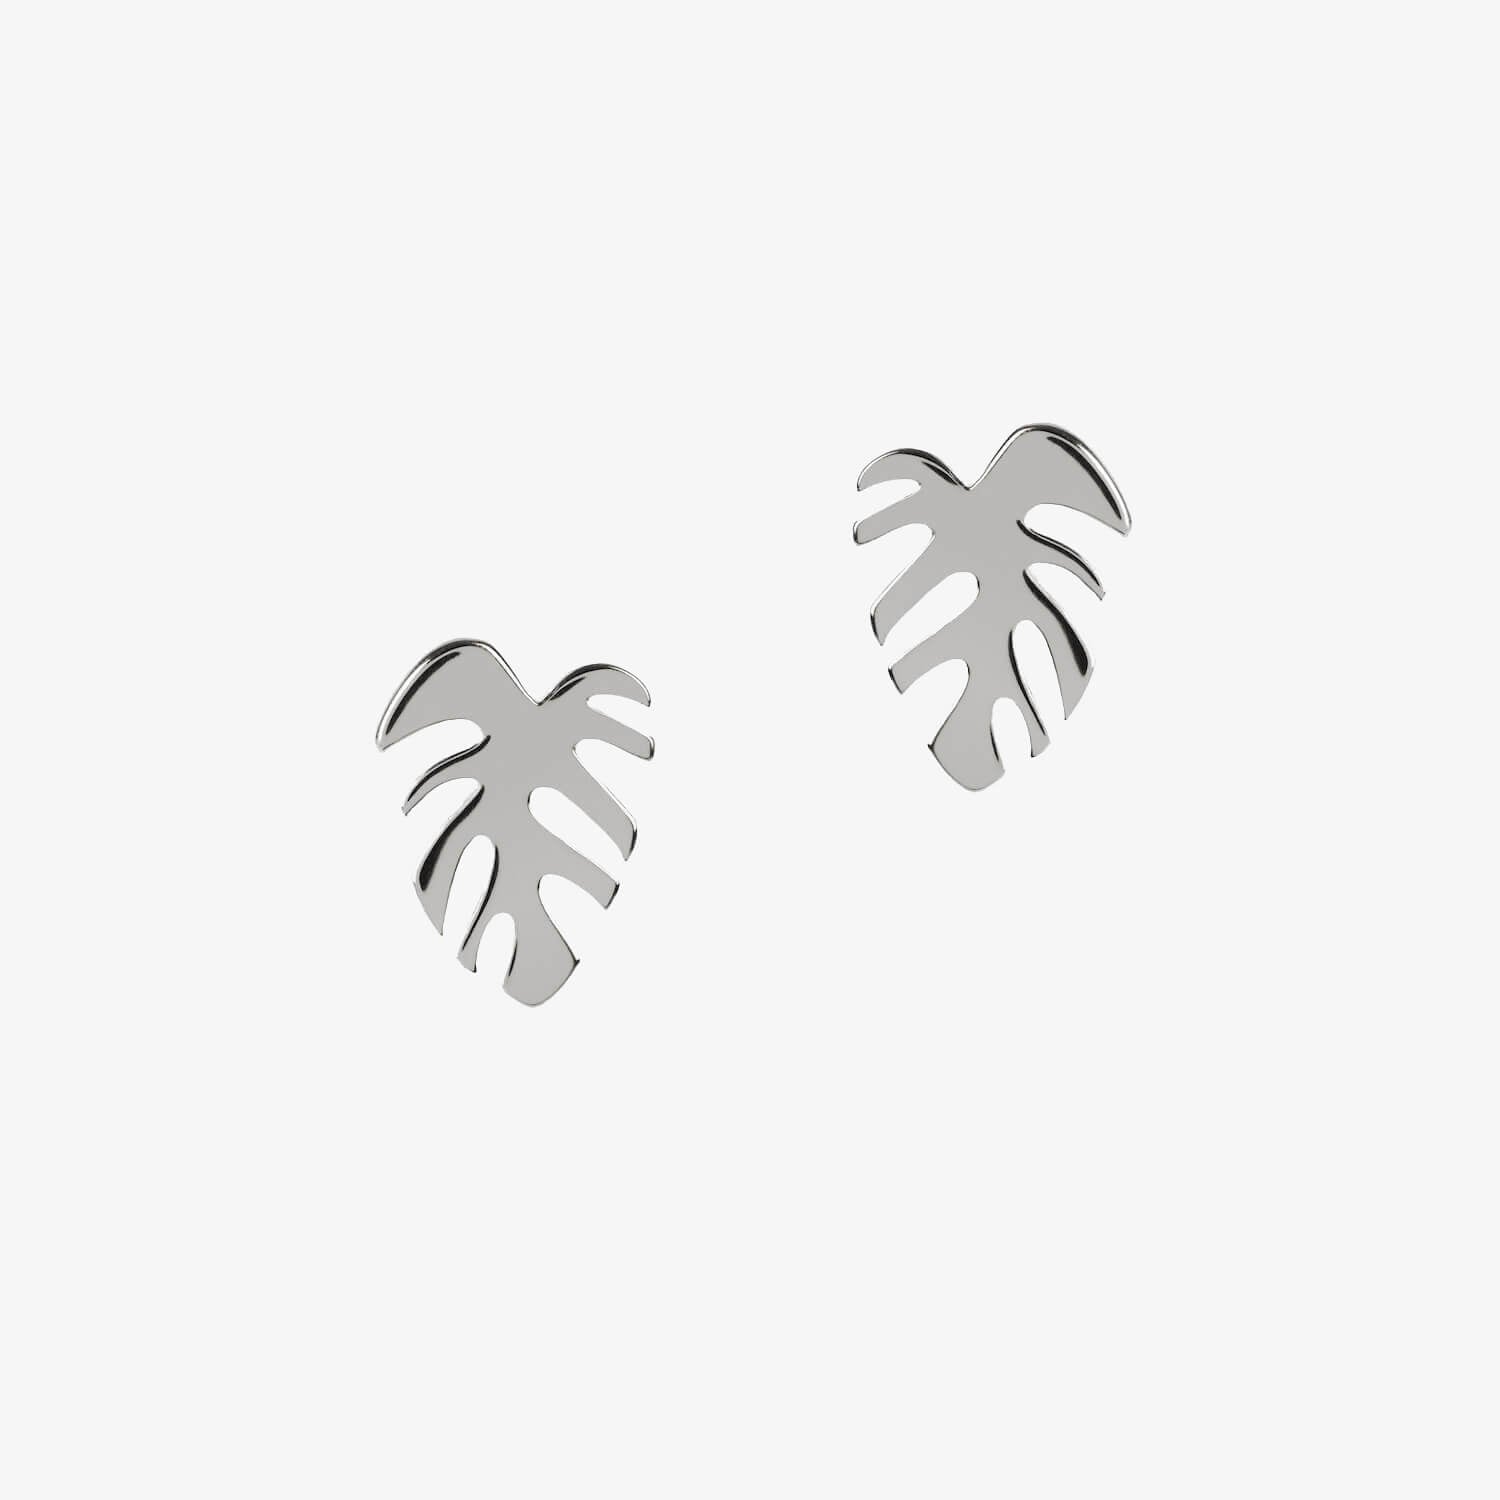 silver monstera leaf shaped earrings by matthew calvin on a white background